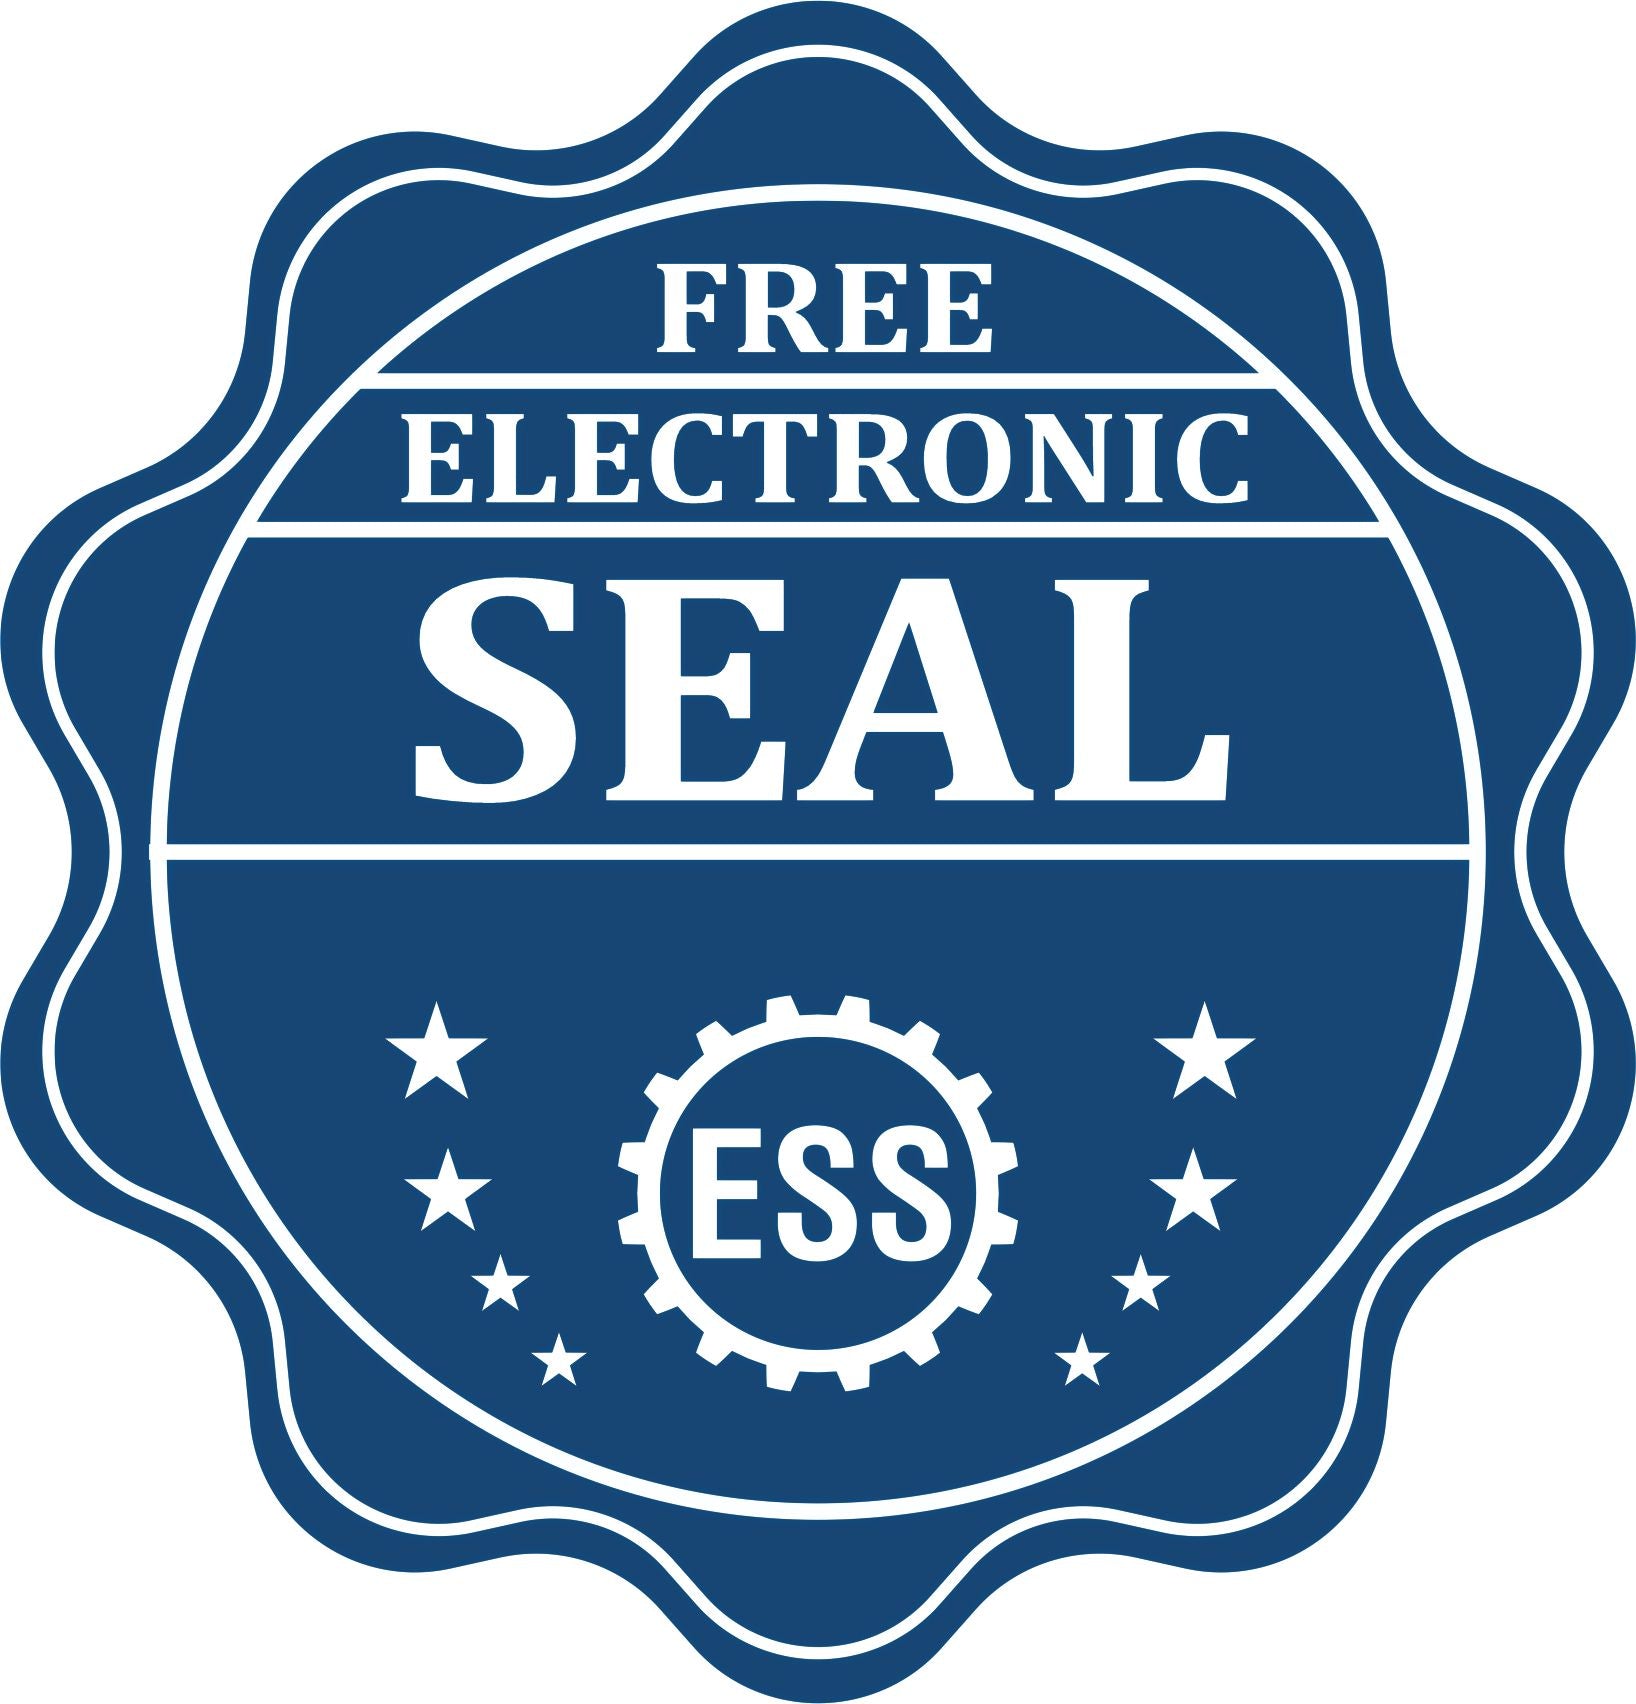 A badge showing a free electronic seal for the State of Michigan Soft Land Surveyor Embossing Seal with stars and the ESS gear on the emblem.